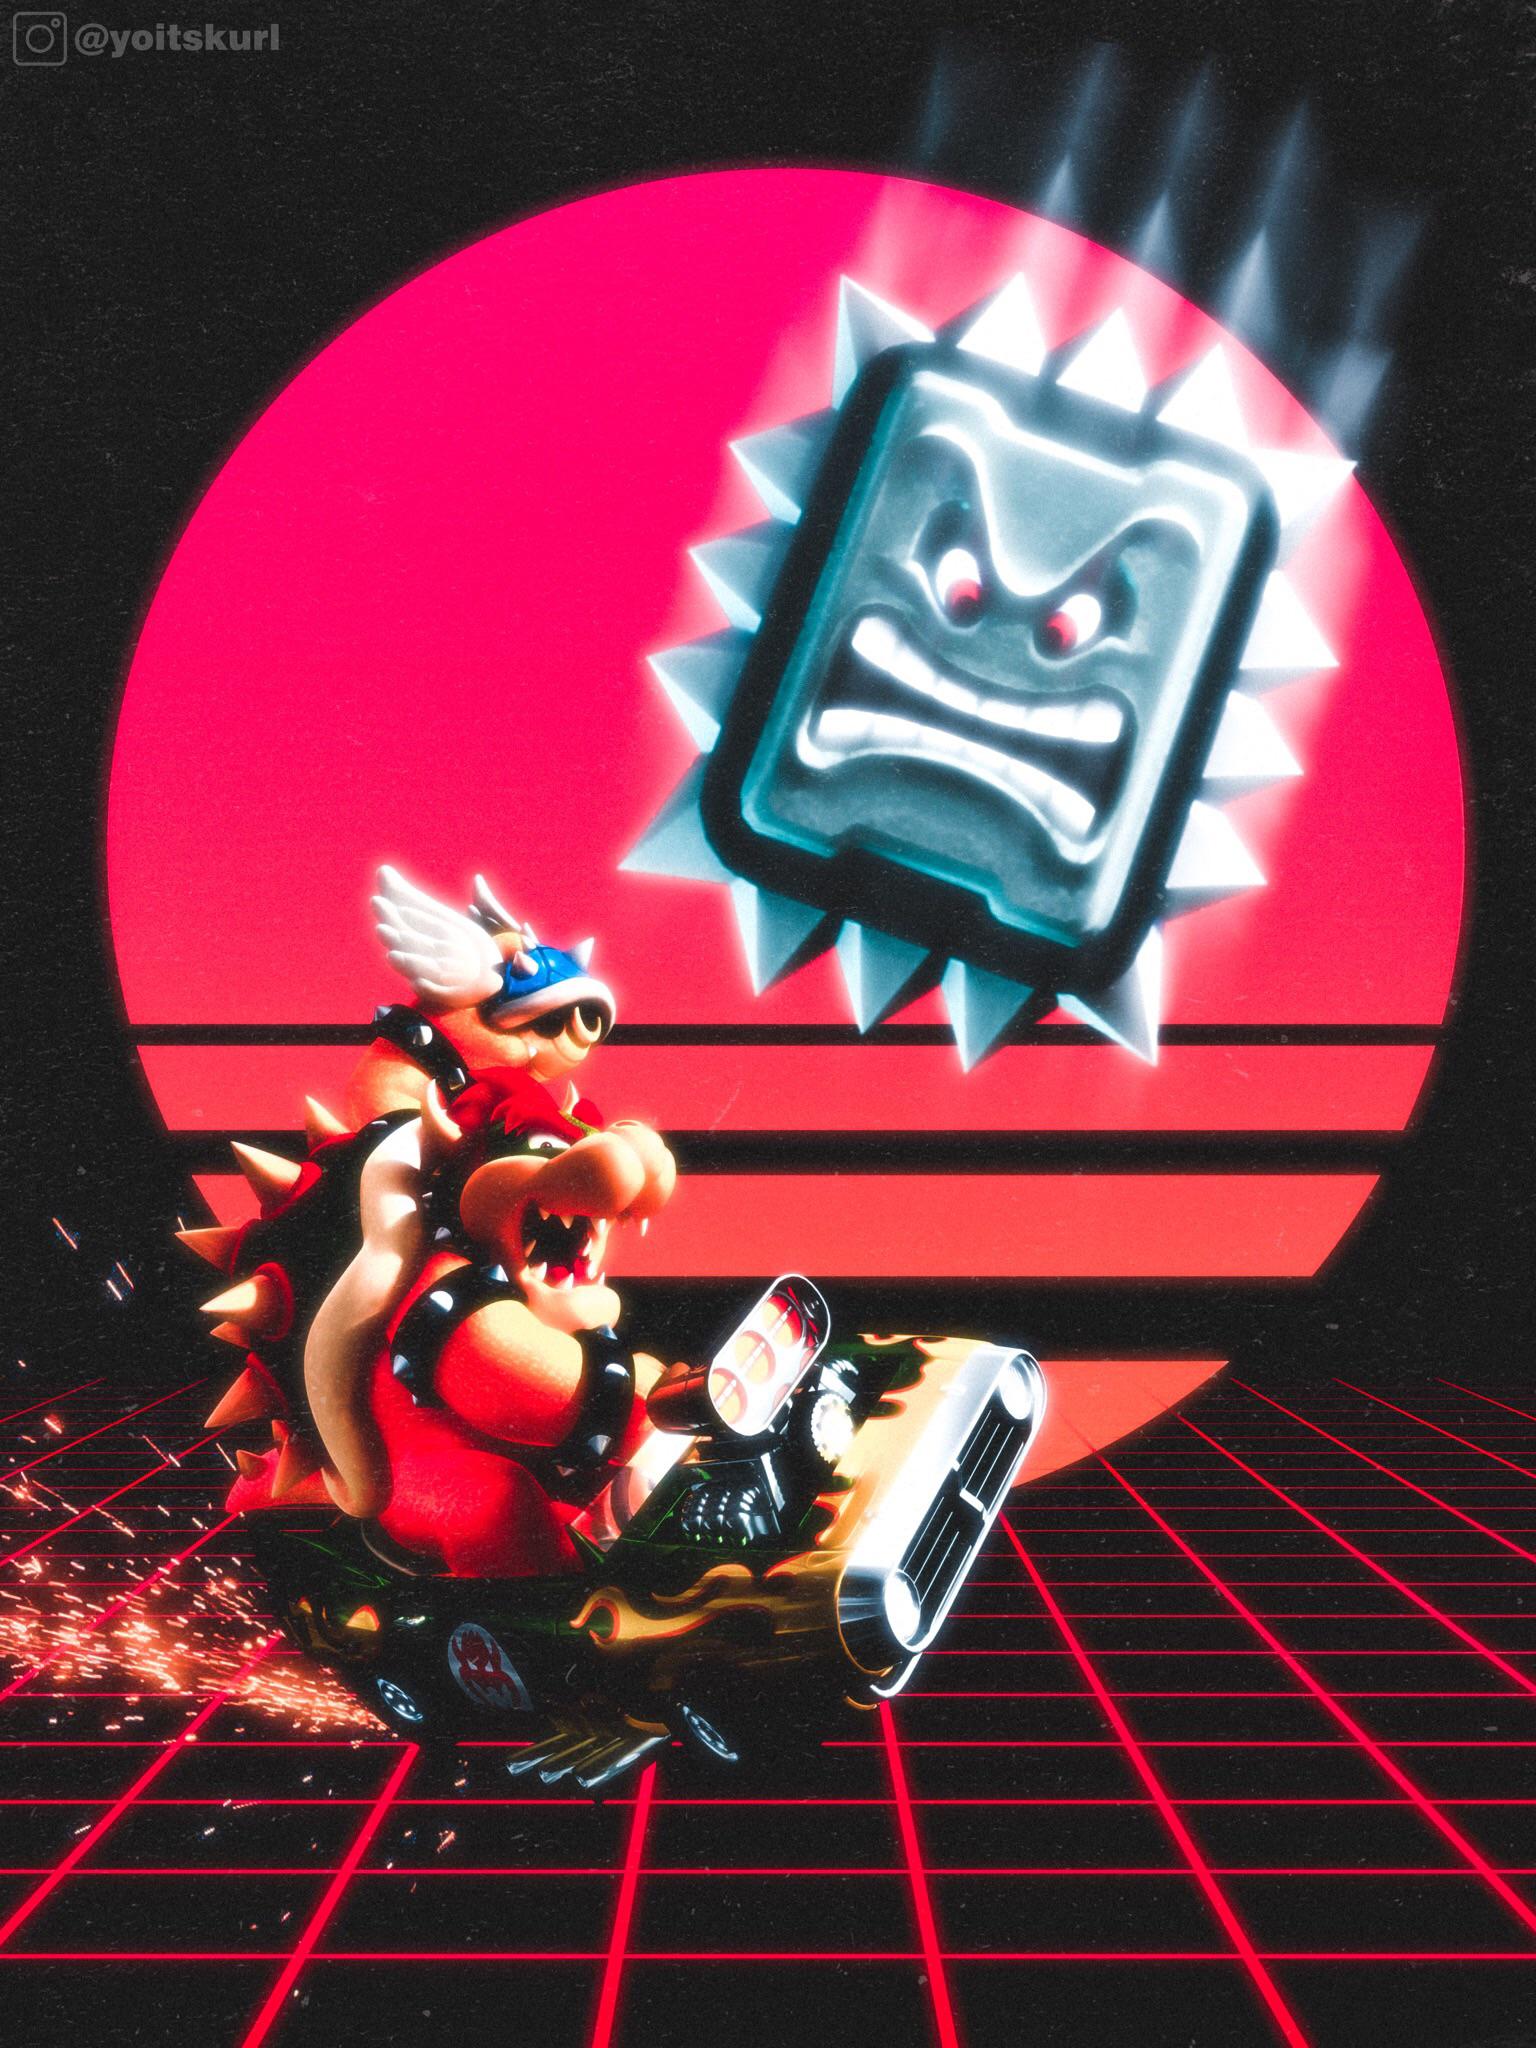 My outrun style Bowser from Mario Kart